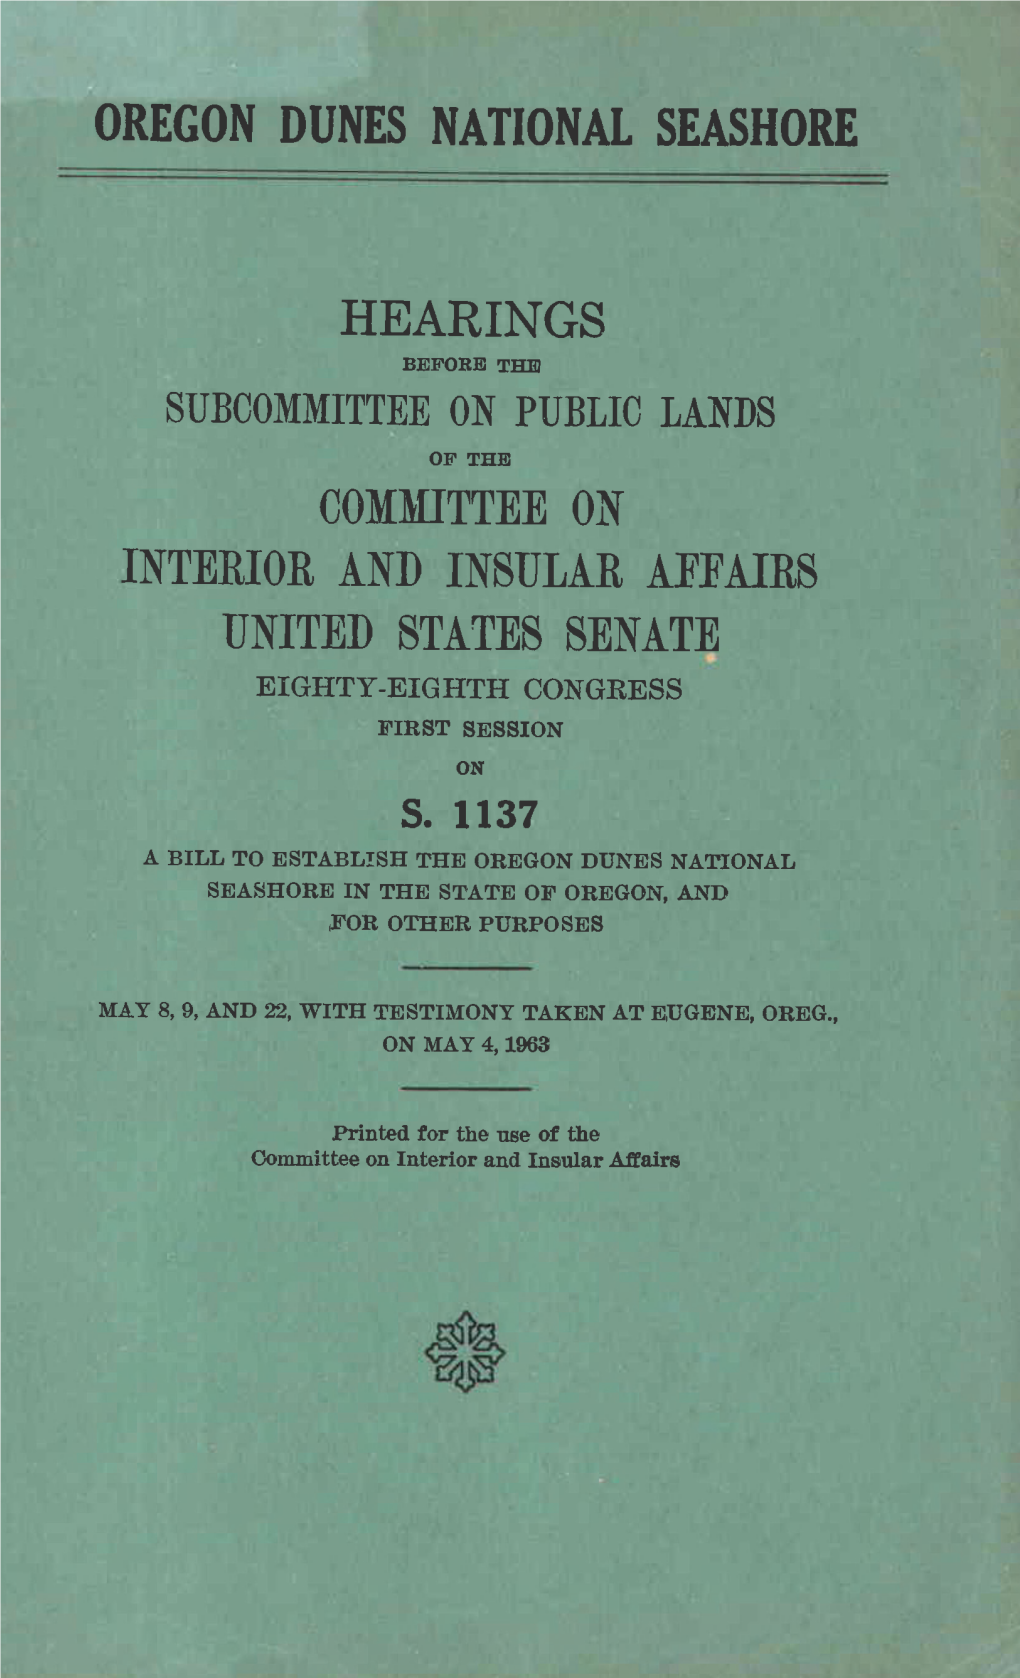 Hearings Before the Subcommittee on Public Lands of the Committee on Interior and Insular Affairs United States Senate Eighty-Eighth Congress First Session on S